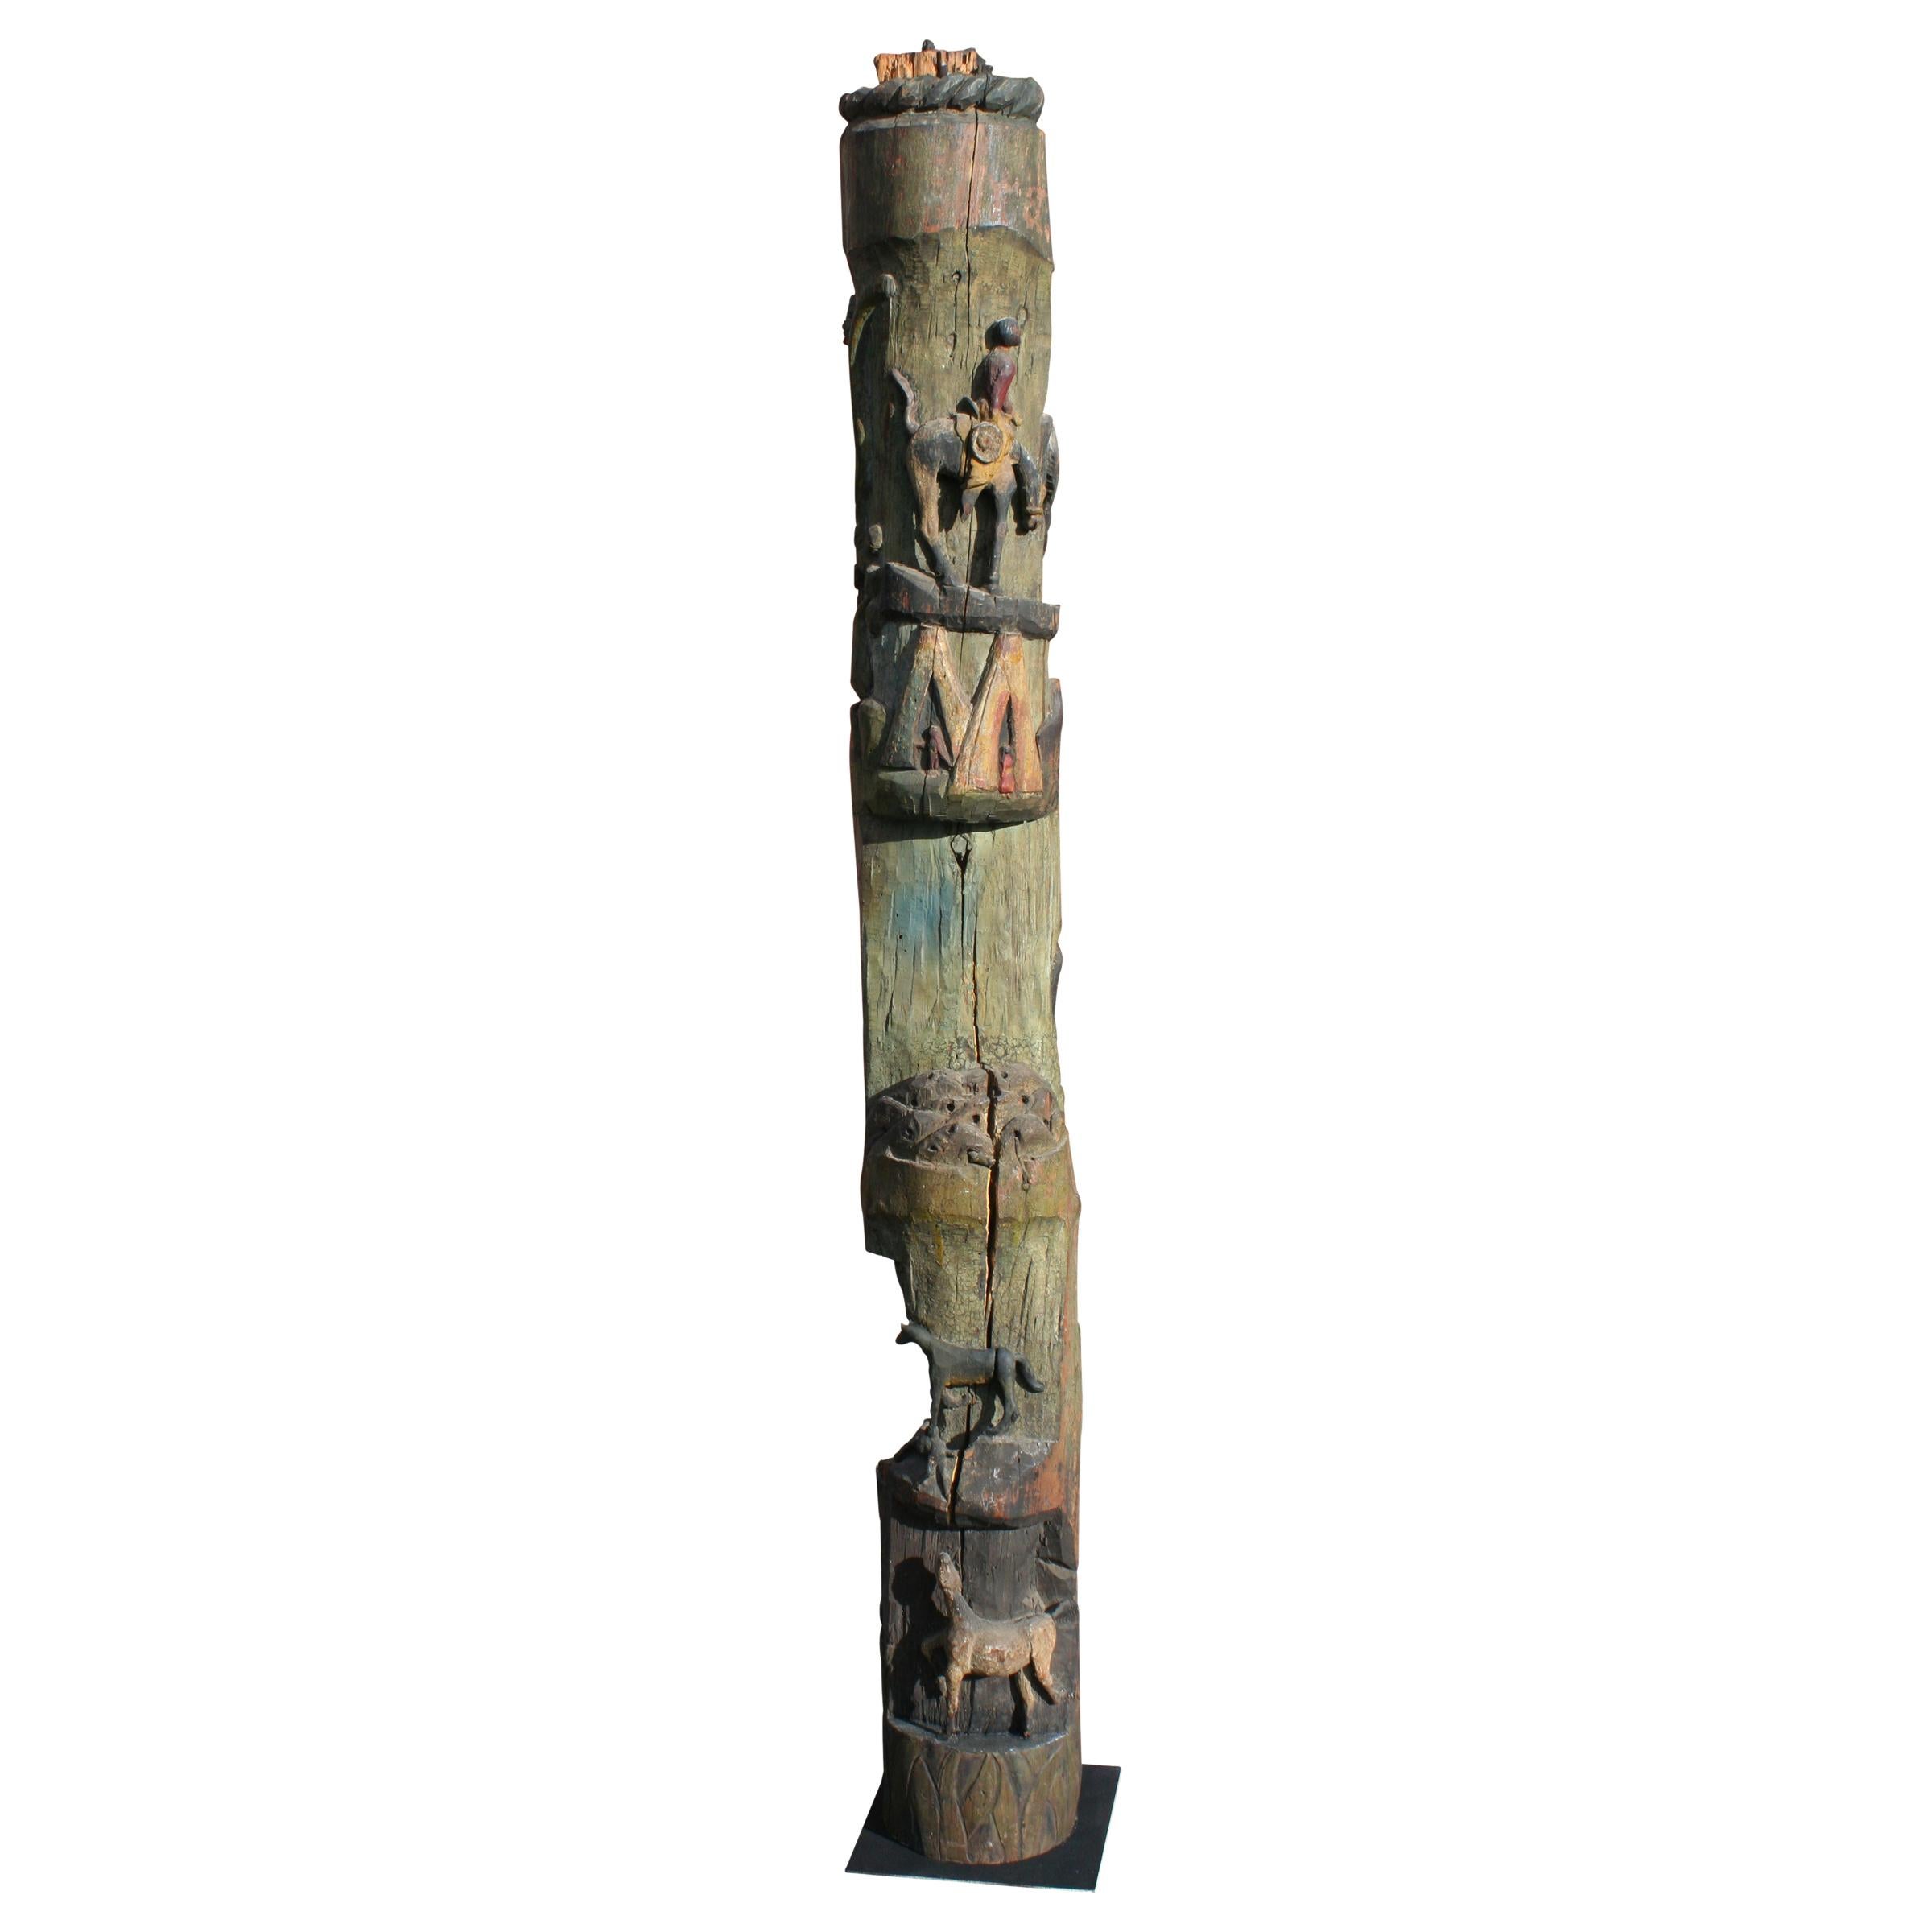 Carved and painted totem with folksy friezes wrapping around pole, depicting imagery of the Wild West; totem painted in colors of red, green, blue, yellow, orange, and black. The totem was passed on to the past owner when Bronco Charlie's favorite